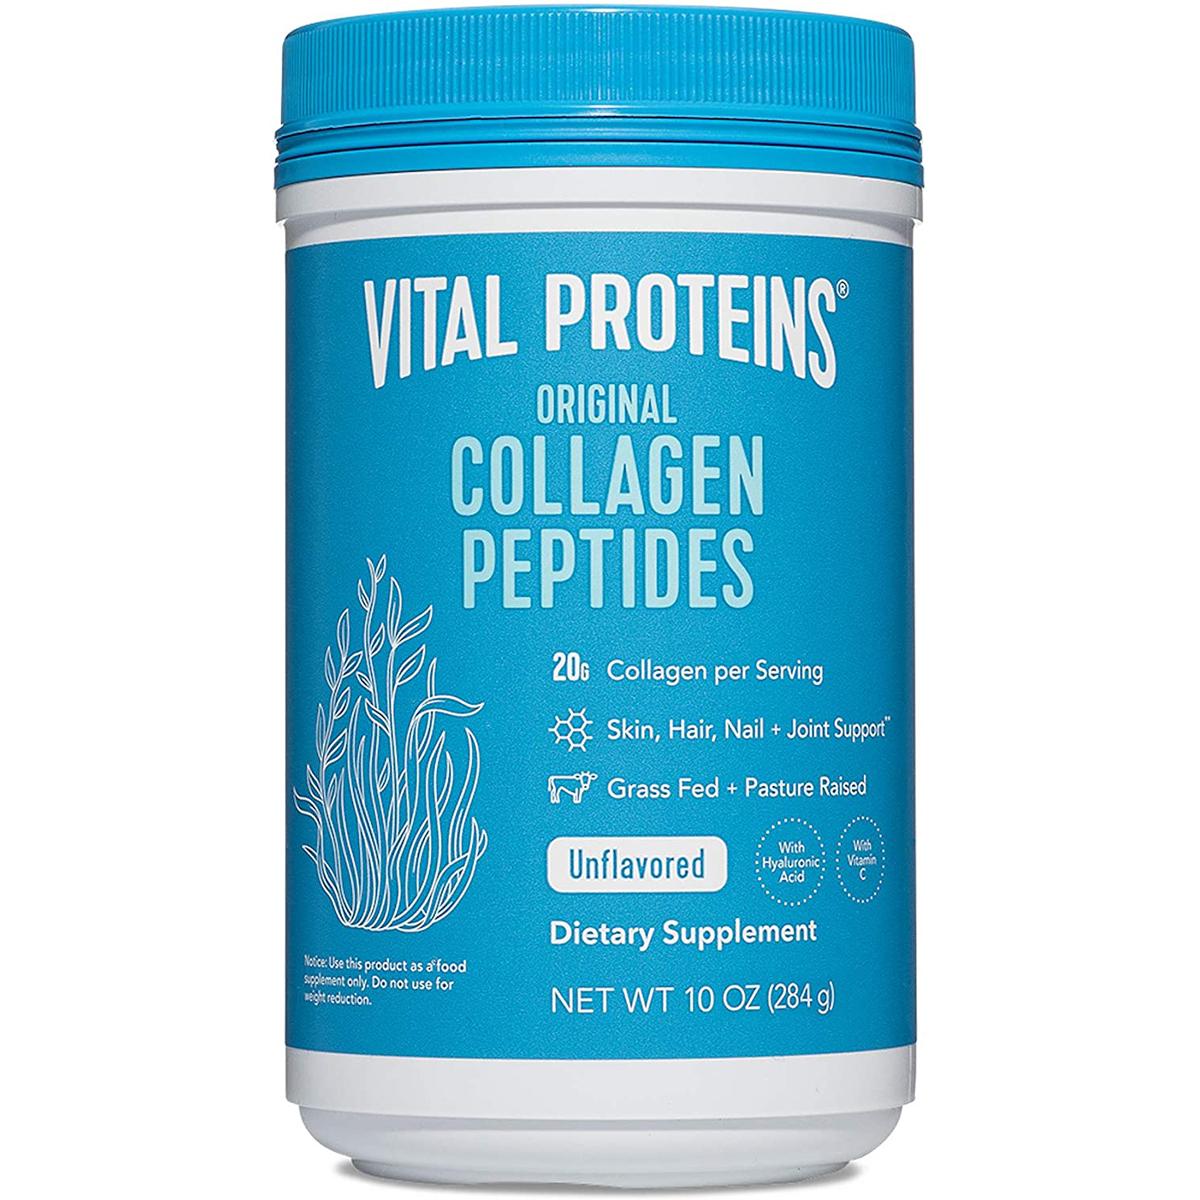 Vital Proteins Collagen Peptides Powder Supplement for $15.70 Shipped